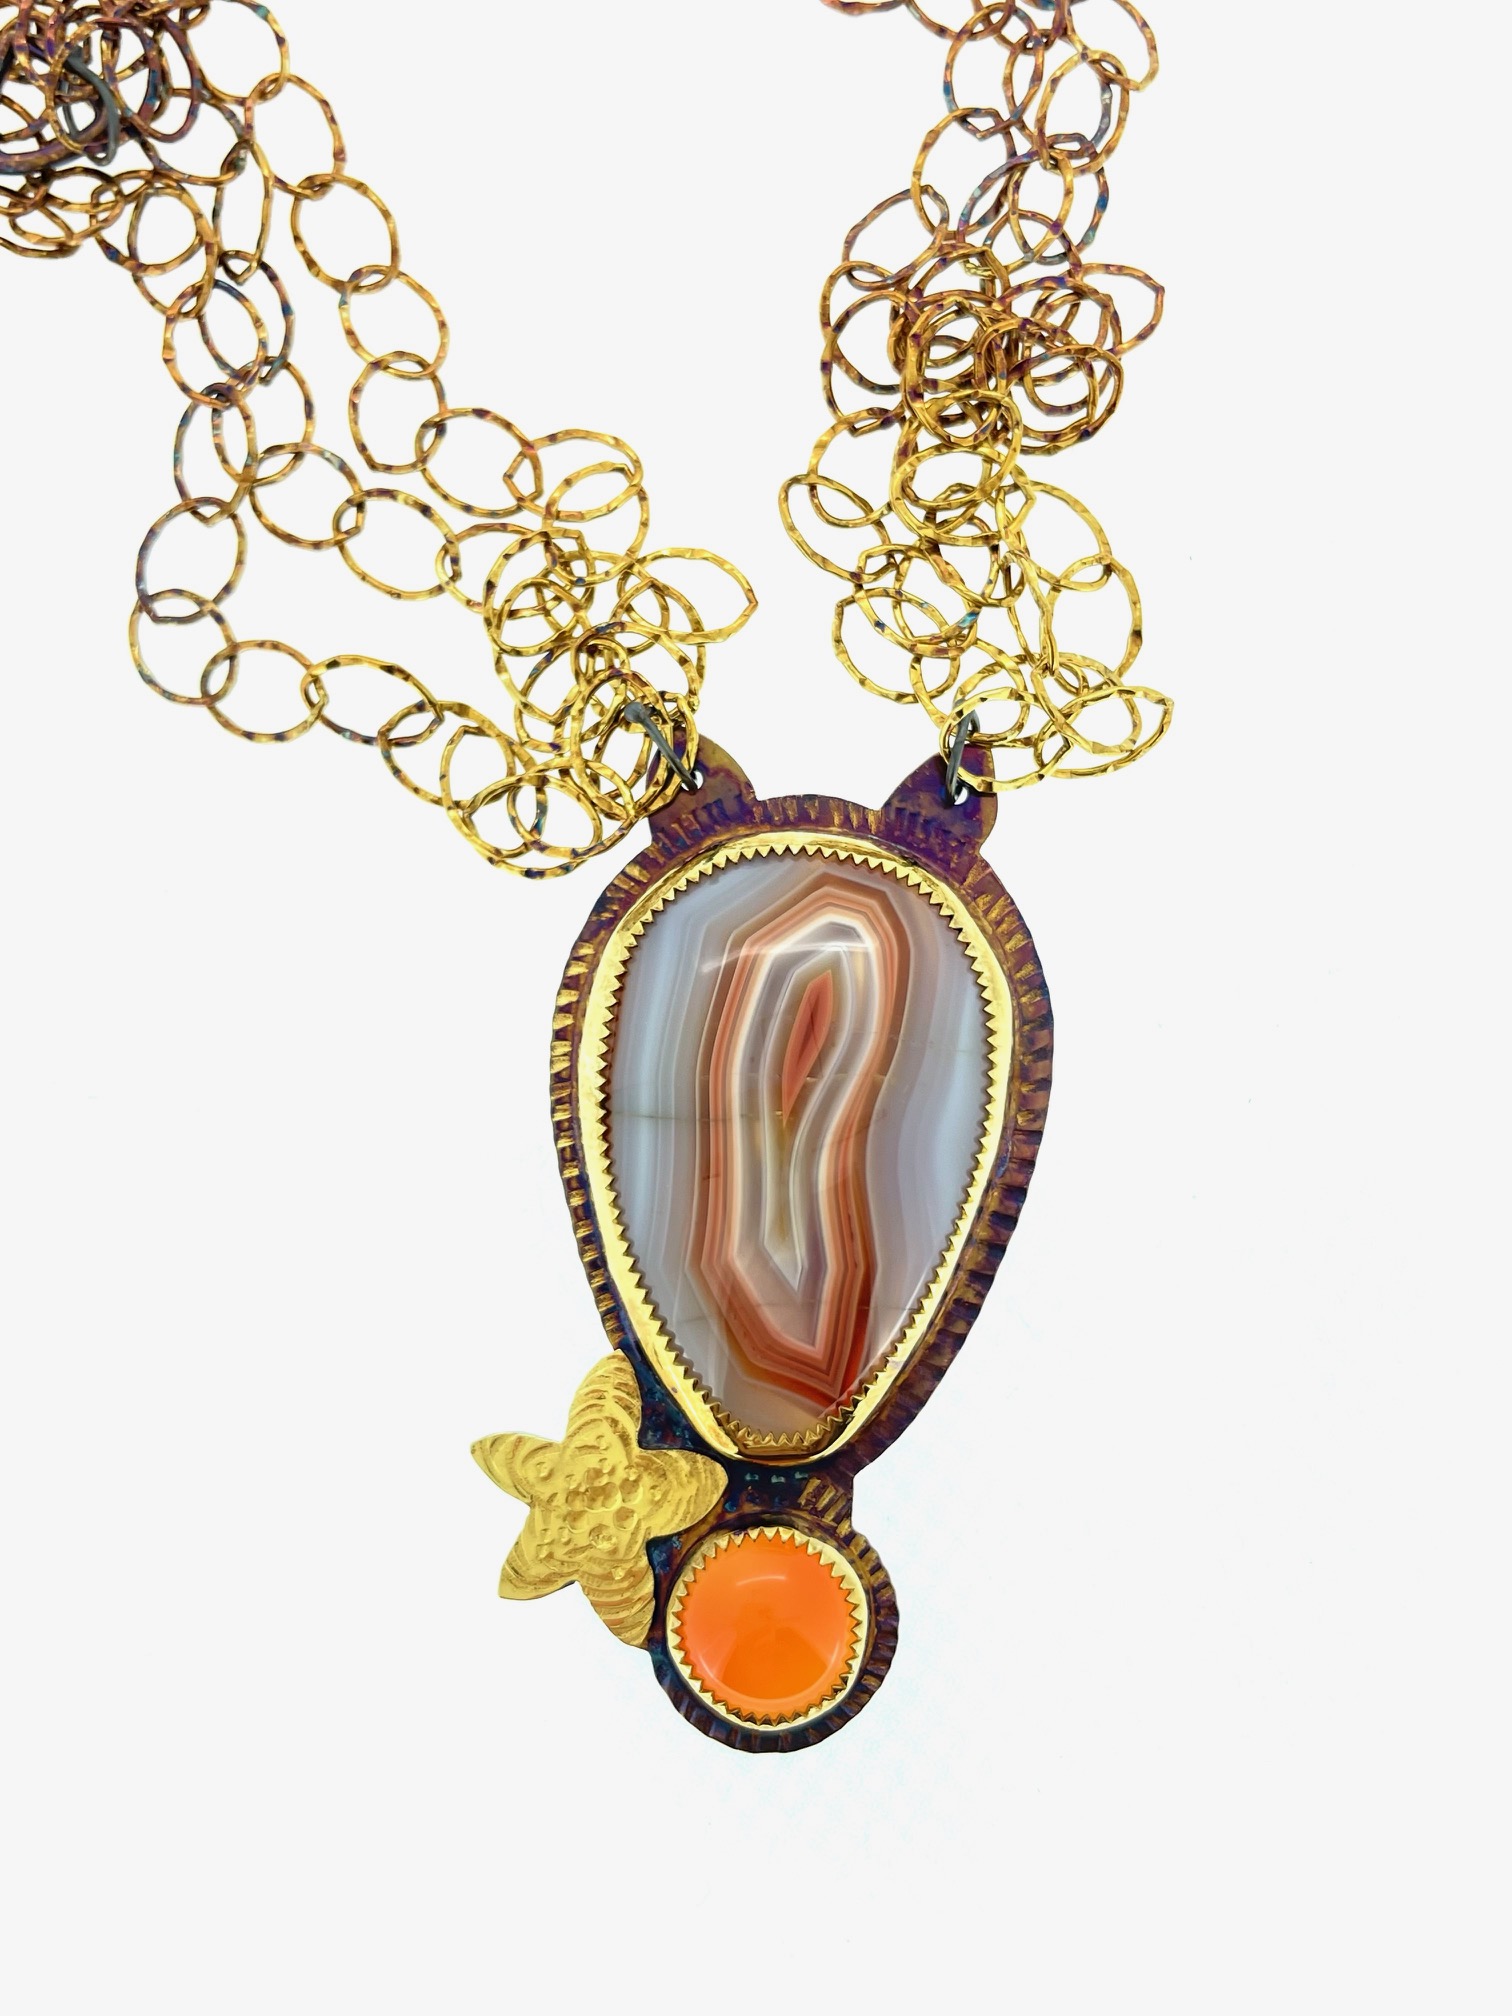 Sterling Silver, 22k Gold, Carnelian and Malawi Agate Necklace